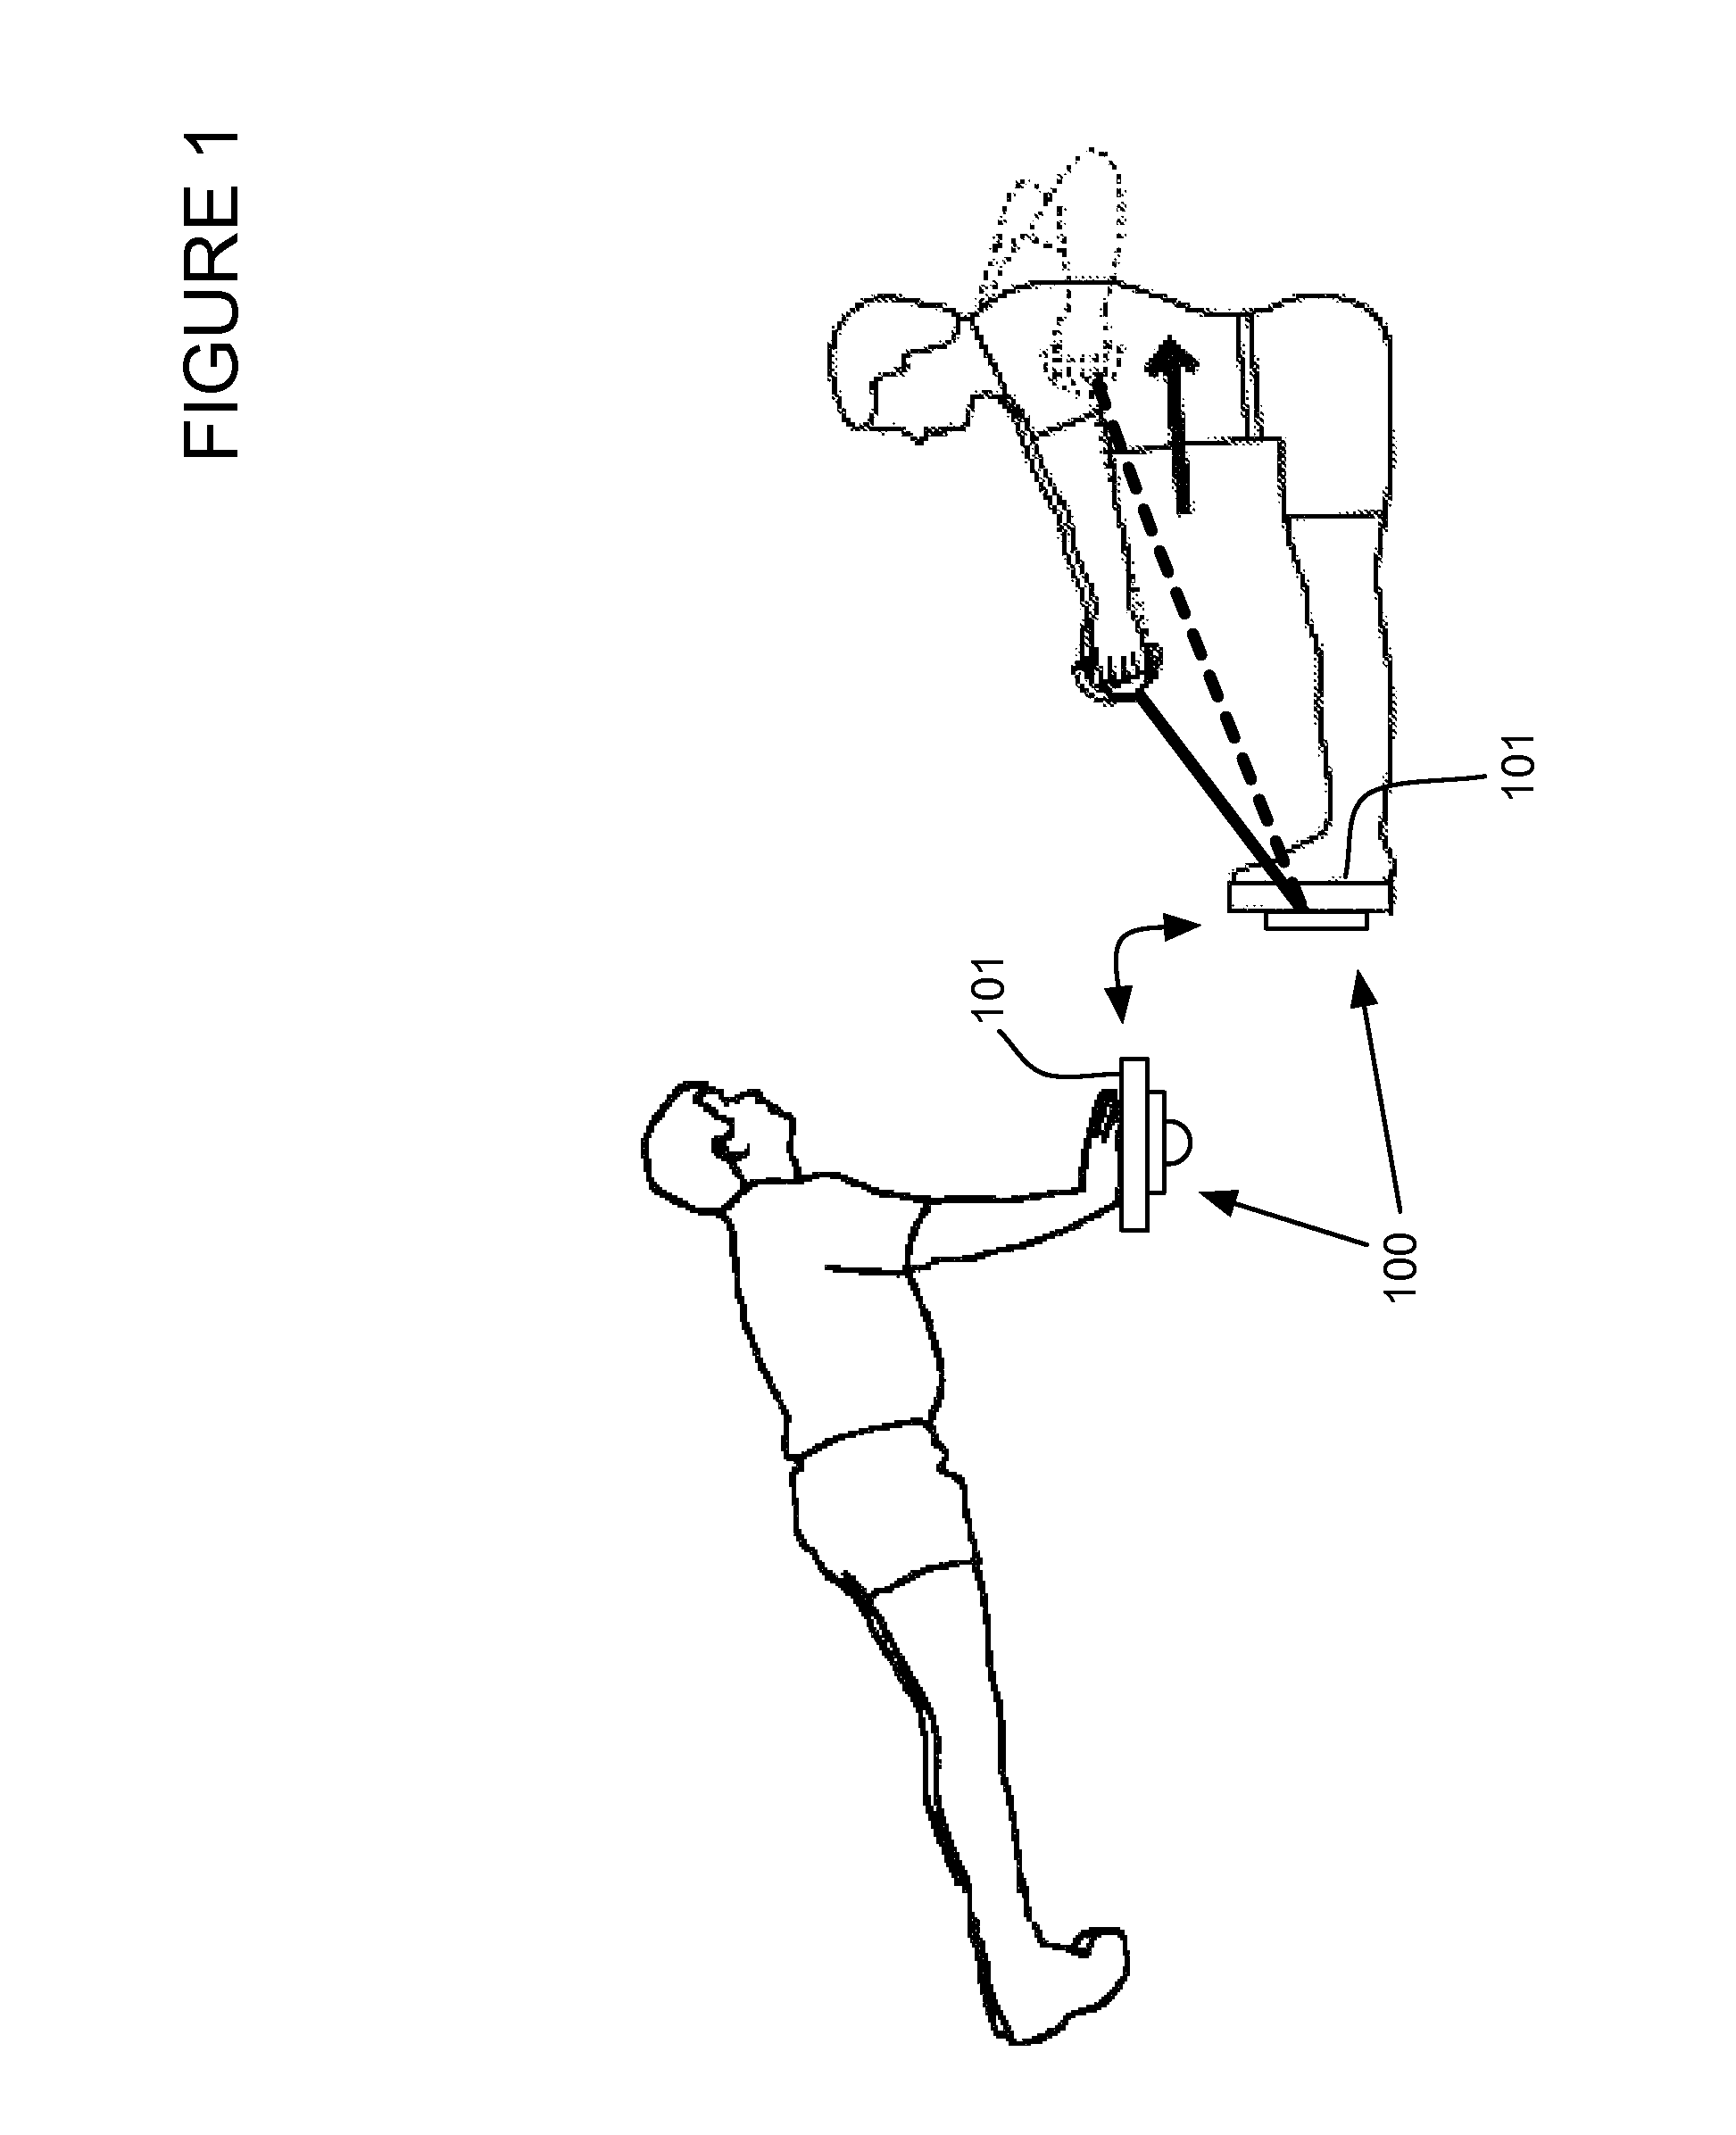 Exercise apparatus for balance and strength training